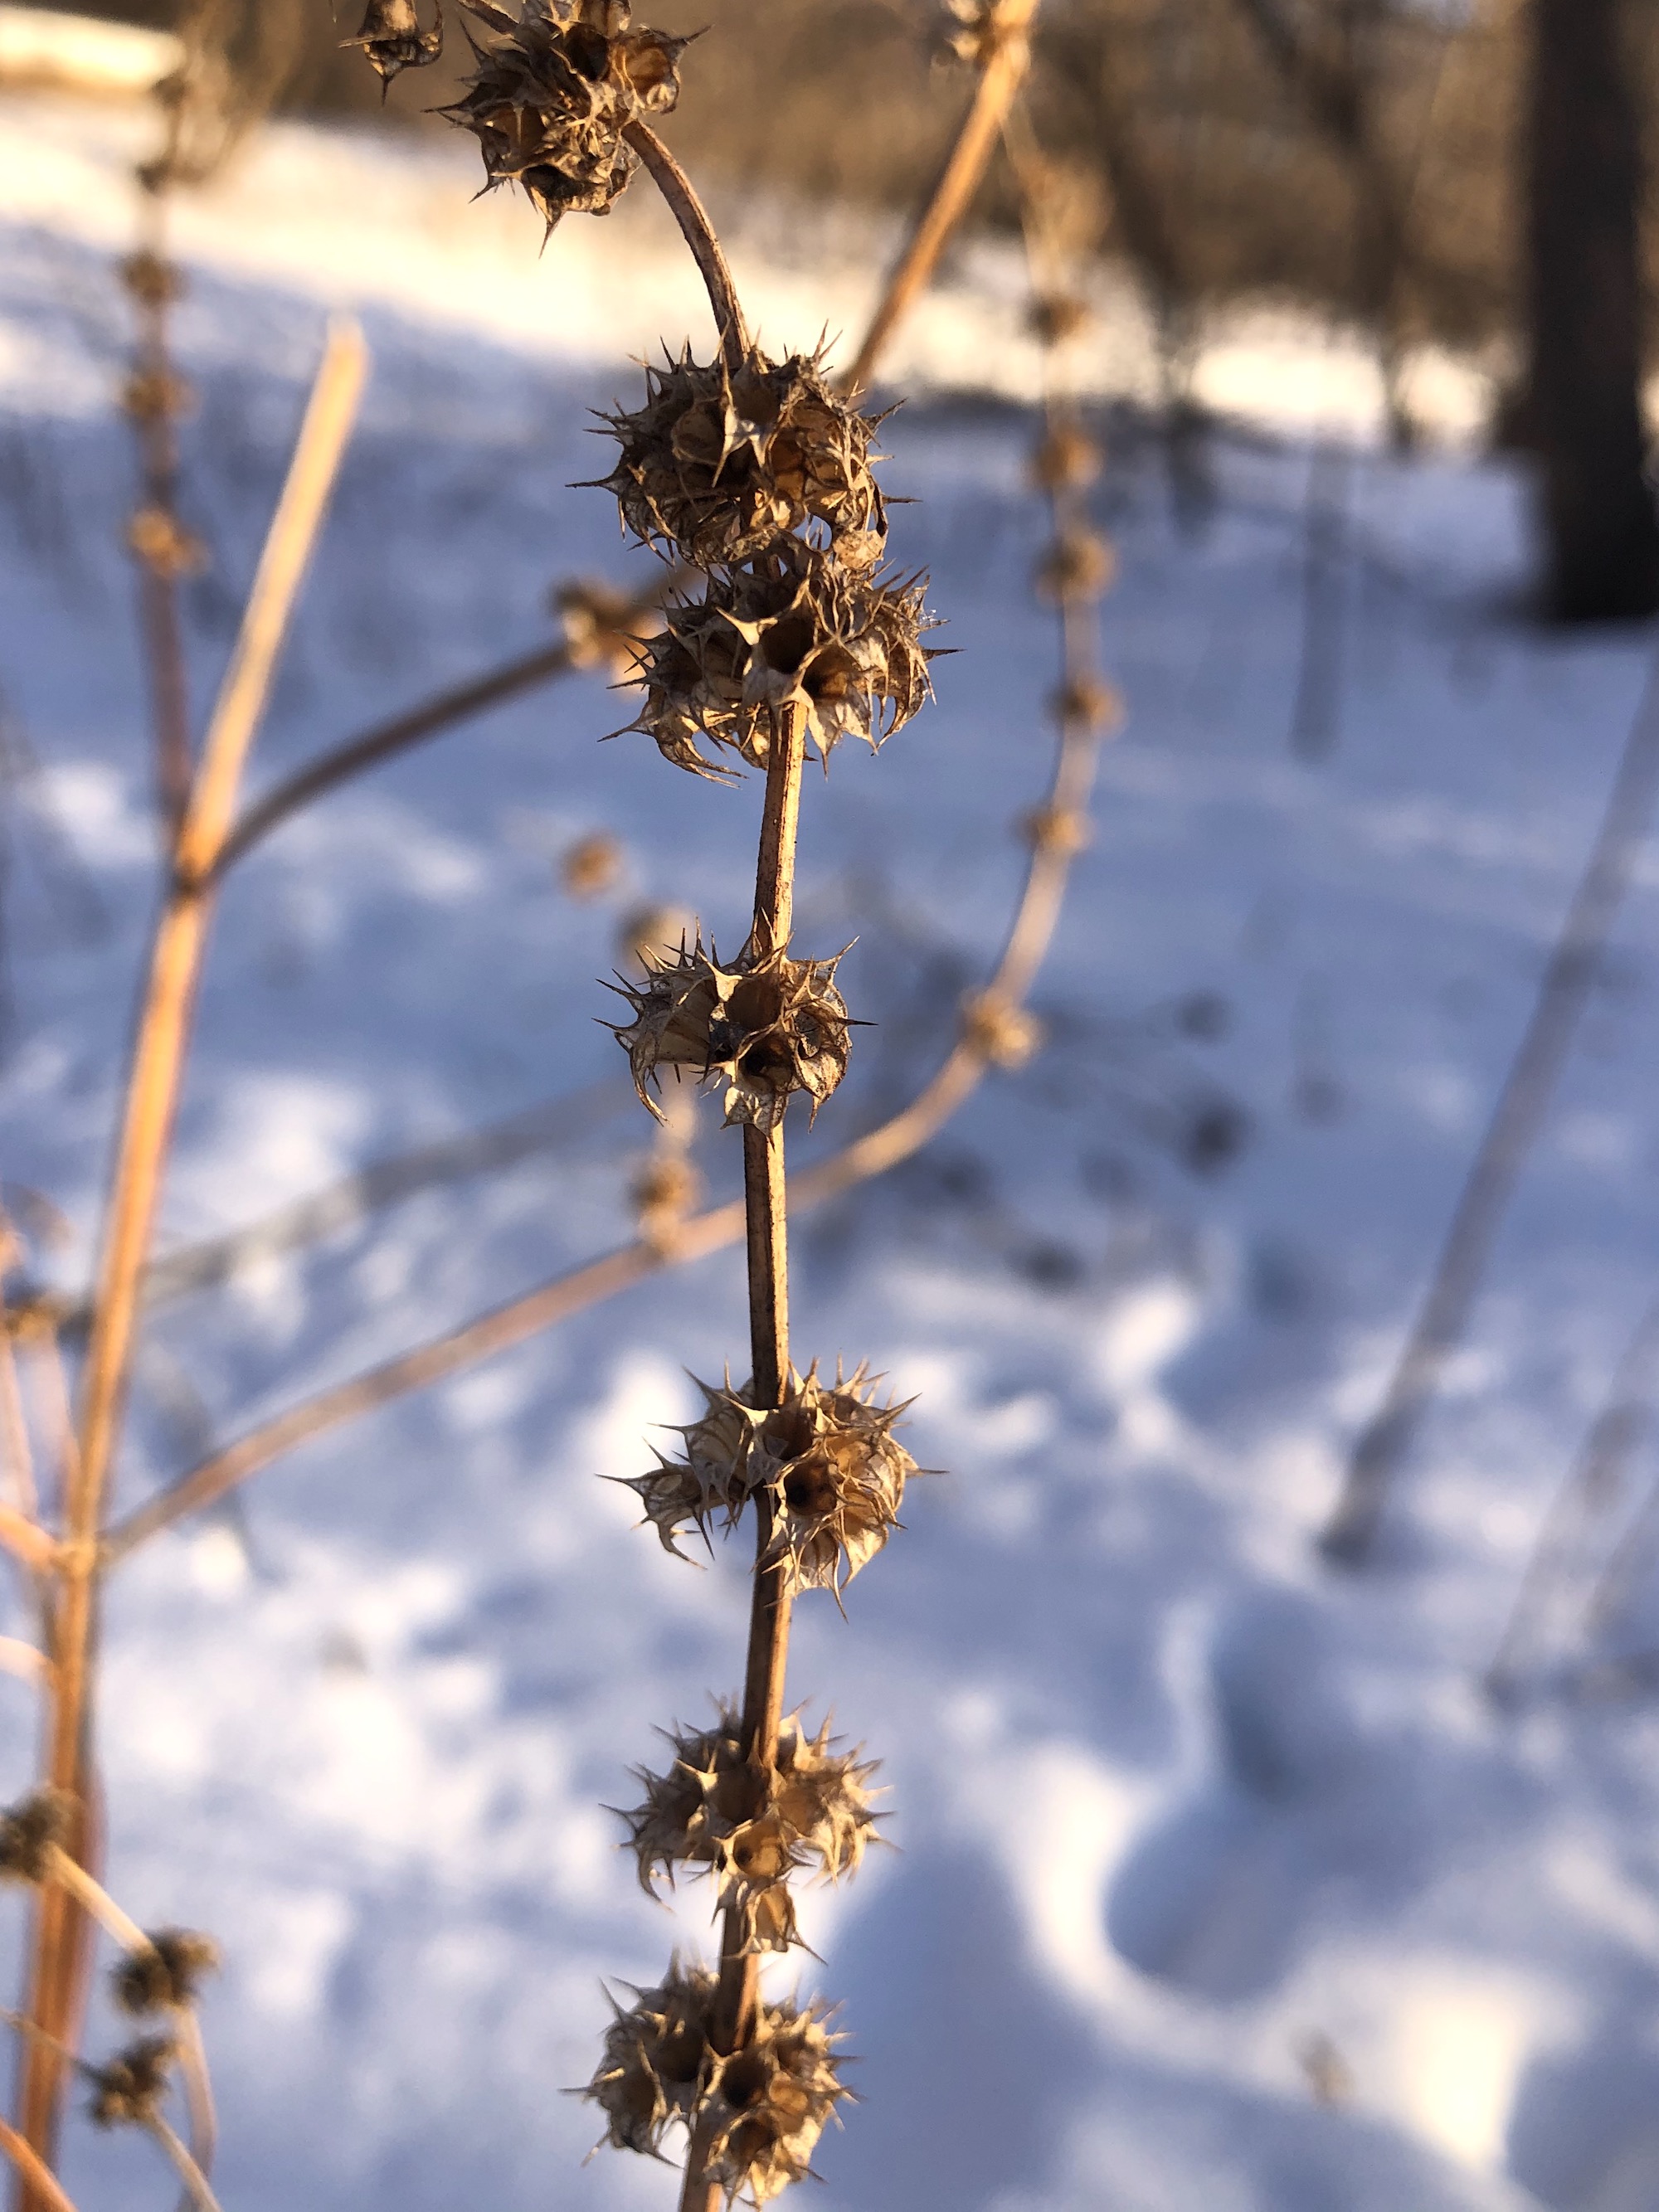 Motherwort in Arboretum by Duck Pond in Madison, Wisconsin on January 21, 2021.